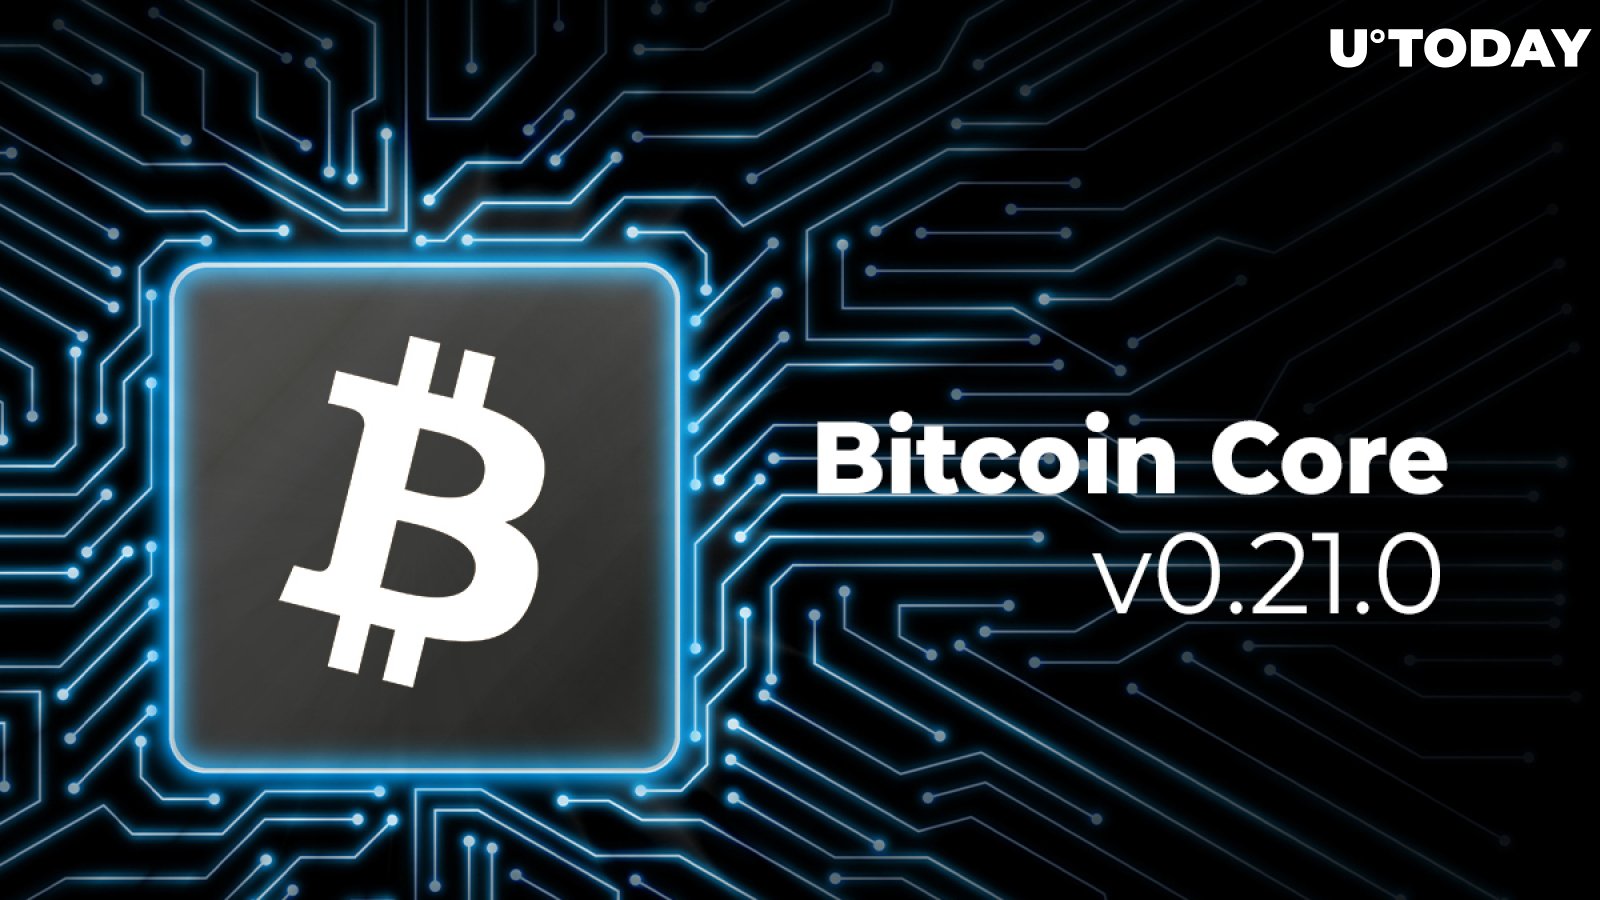 Bitcoin Core New Version Released: What's New in v0.21.0?